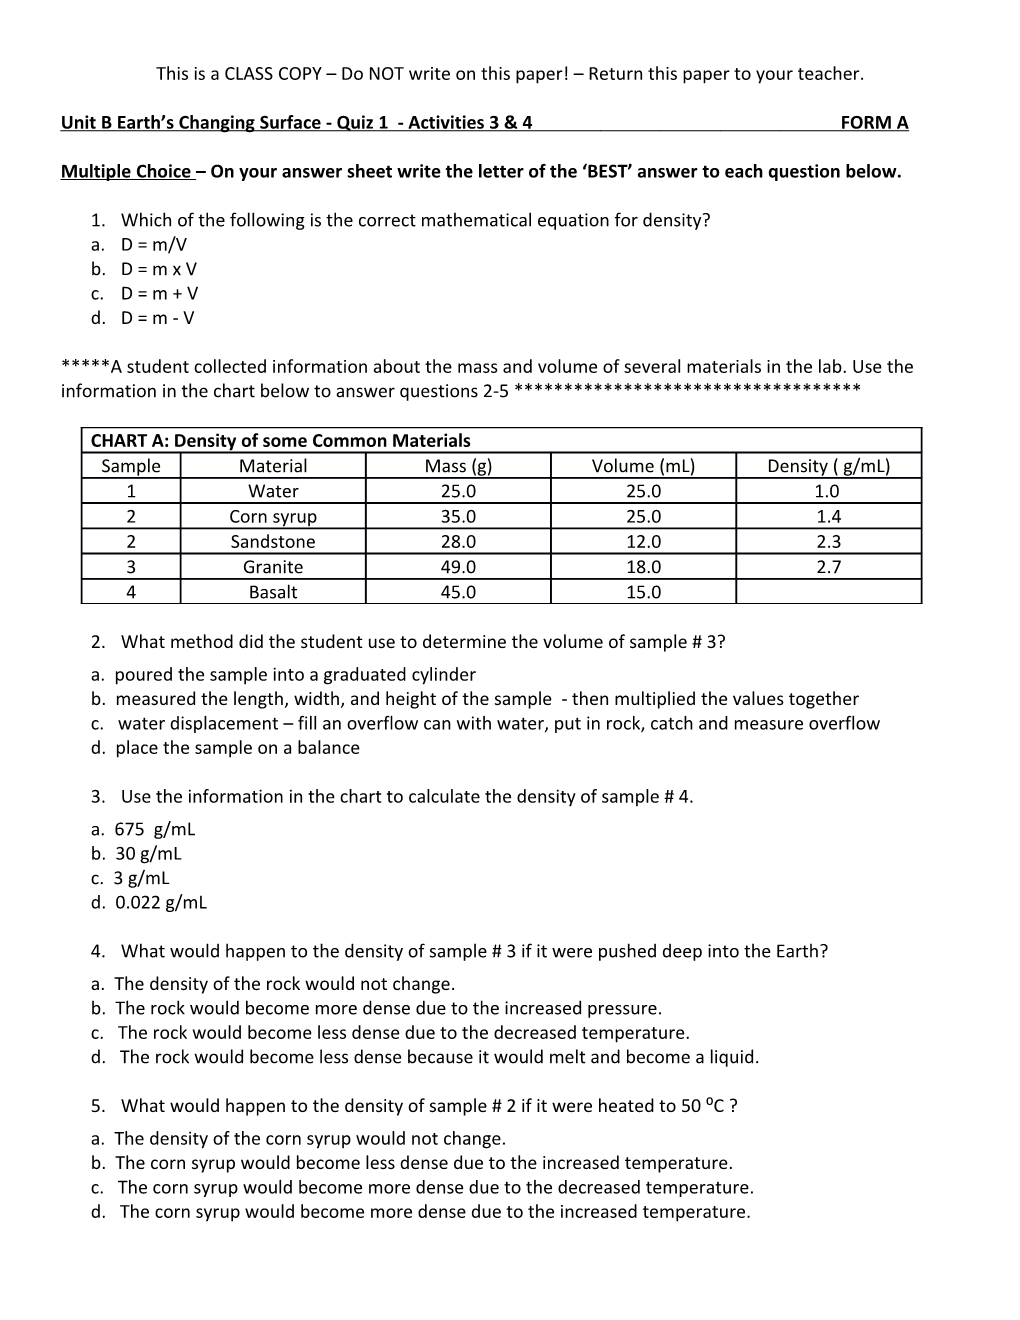 Unit B Earth S Changing Surface - Quiz 1 - Activities 3 & 4 FORM A